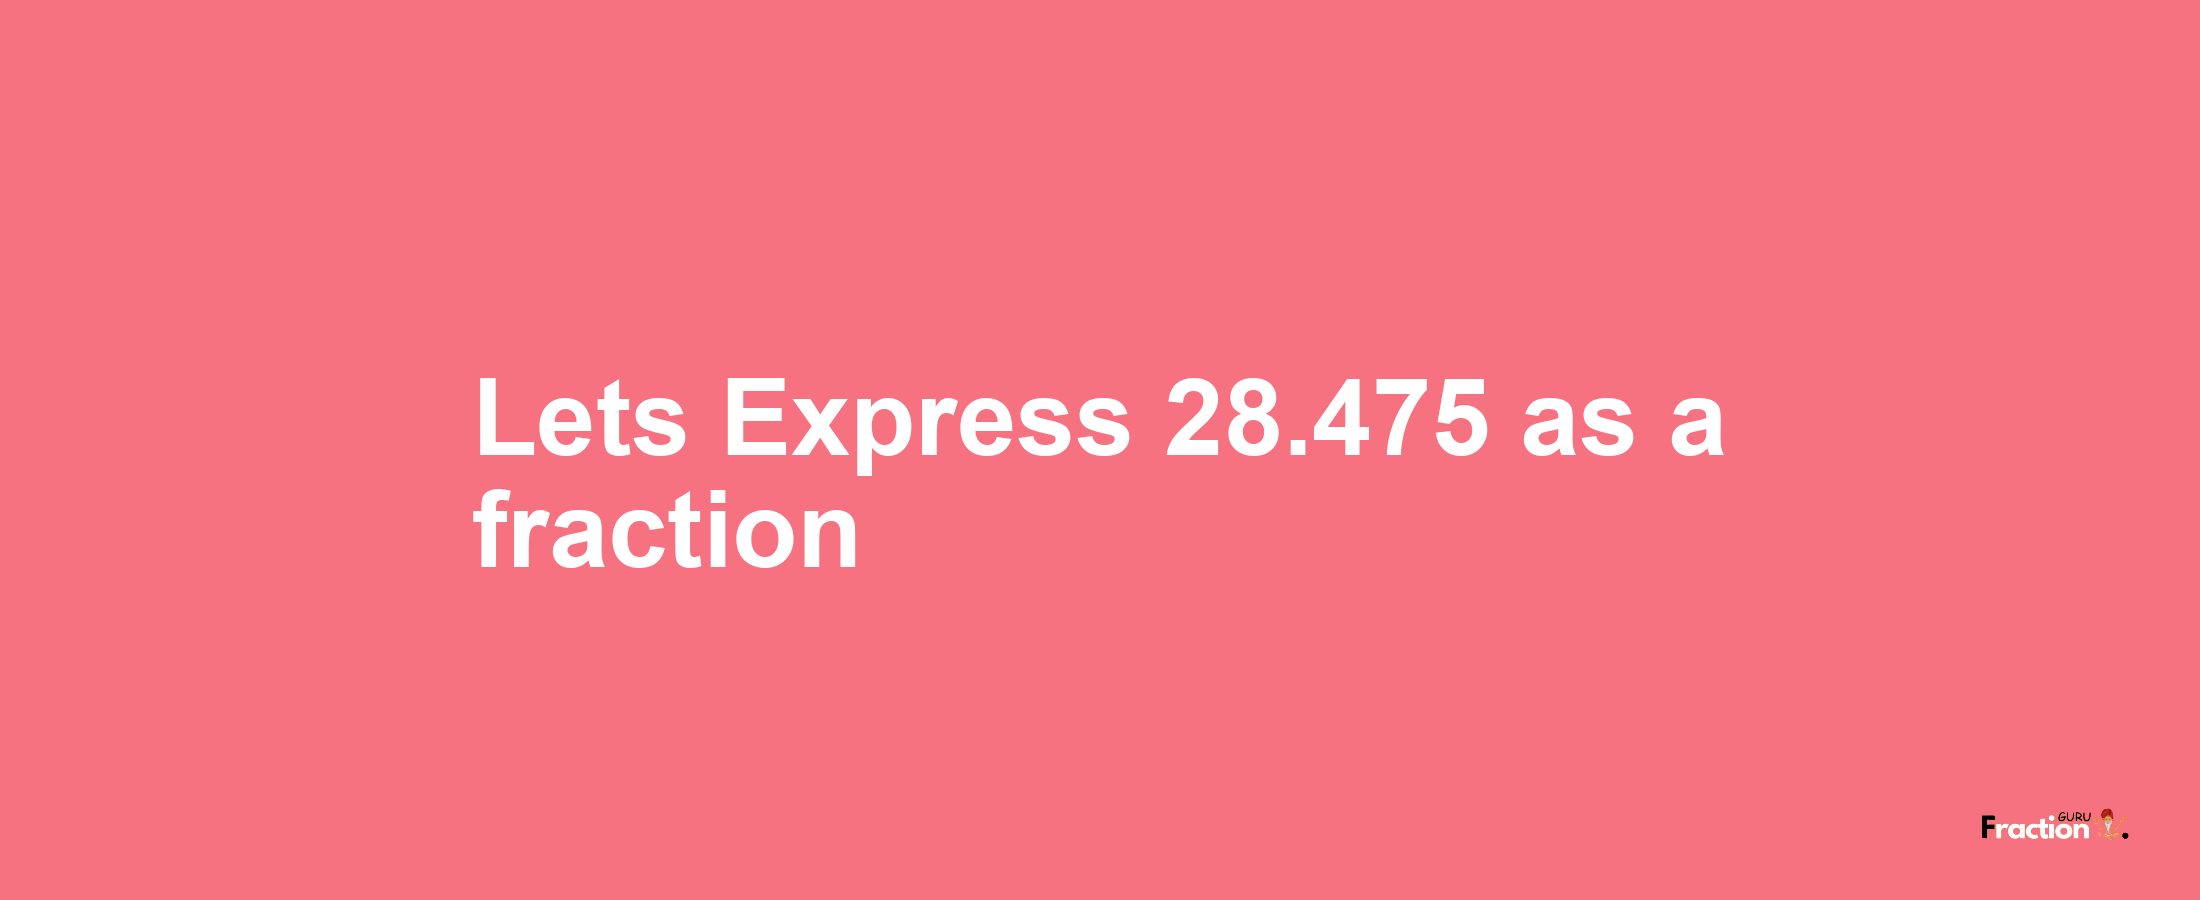 Lets Express 28.475 as afraction